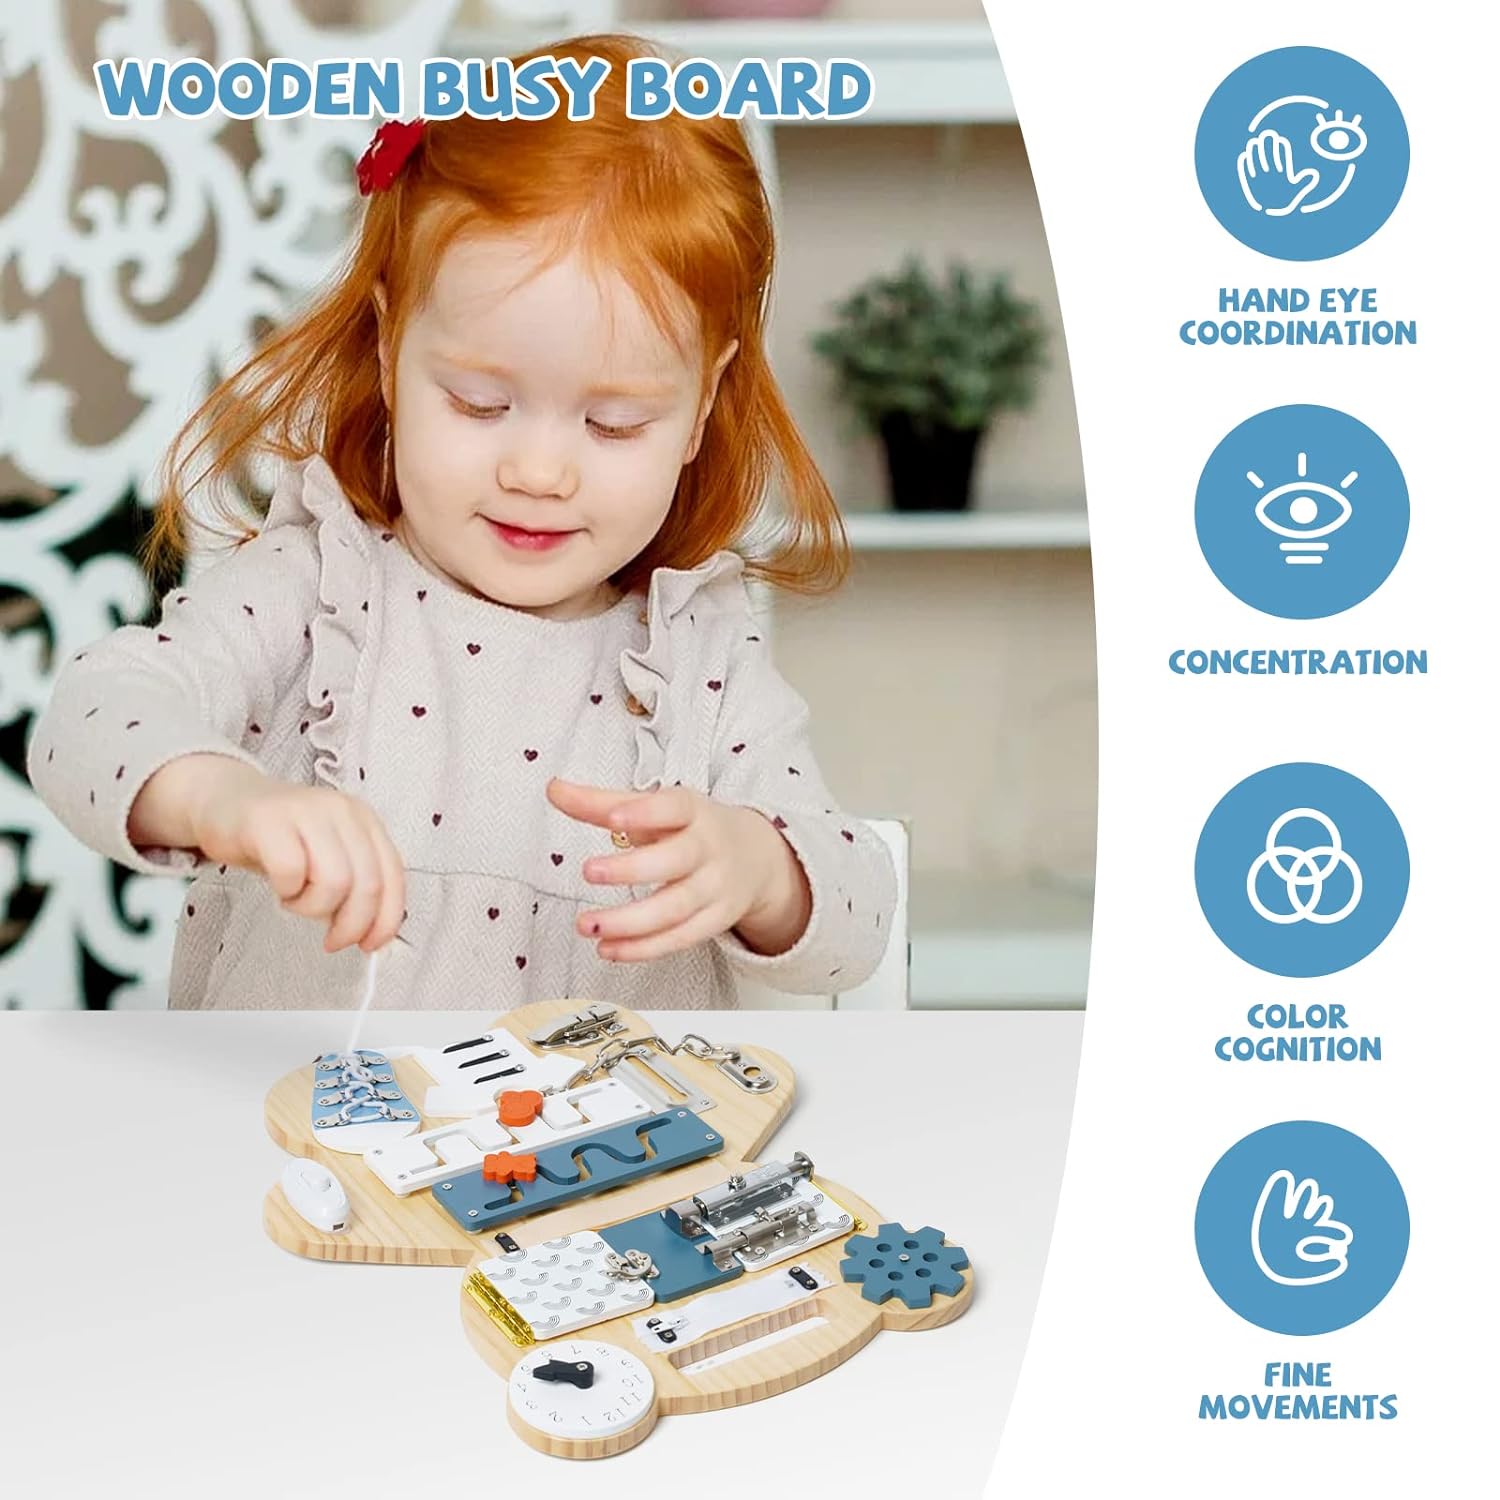 thinkstar Montessori Wooden Busy Board For Toddlers,Toddler Busy Board Montessori Sensory Activity,With Accessories Such As Shoelaces…